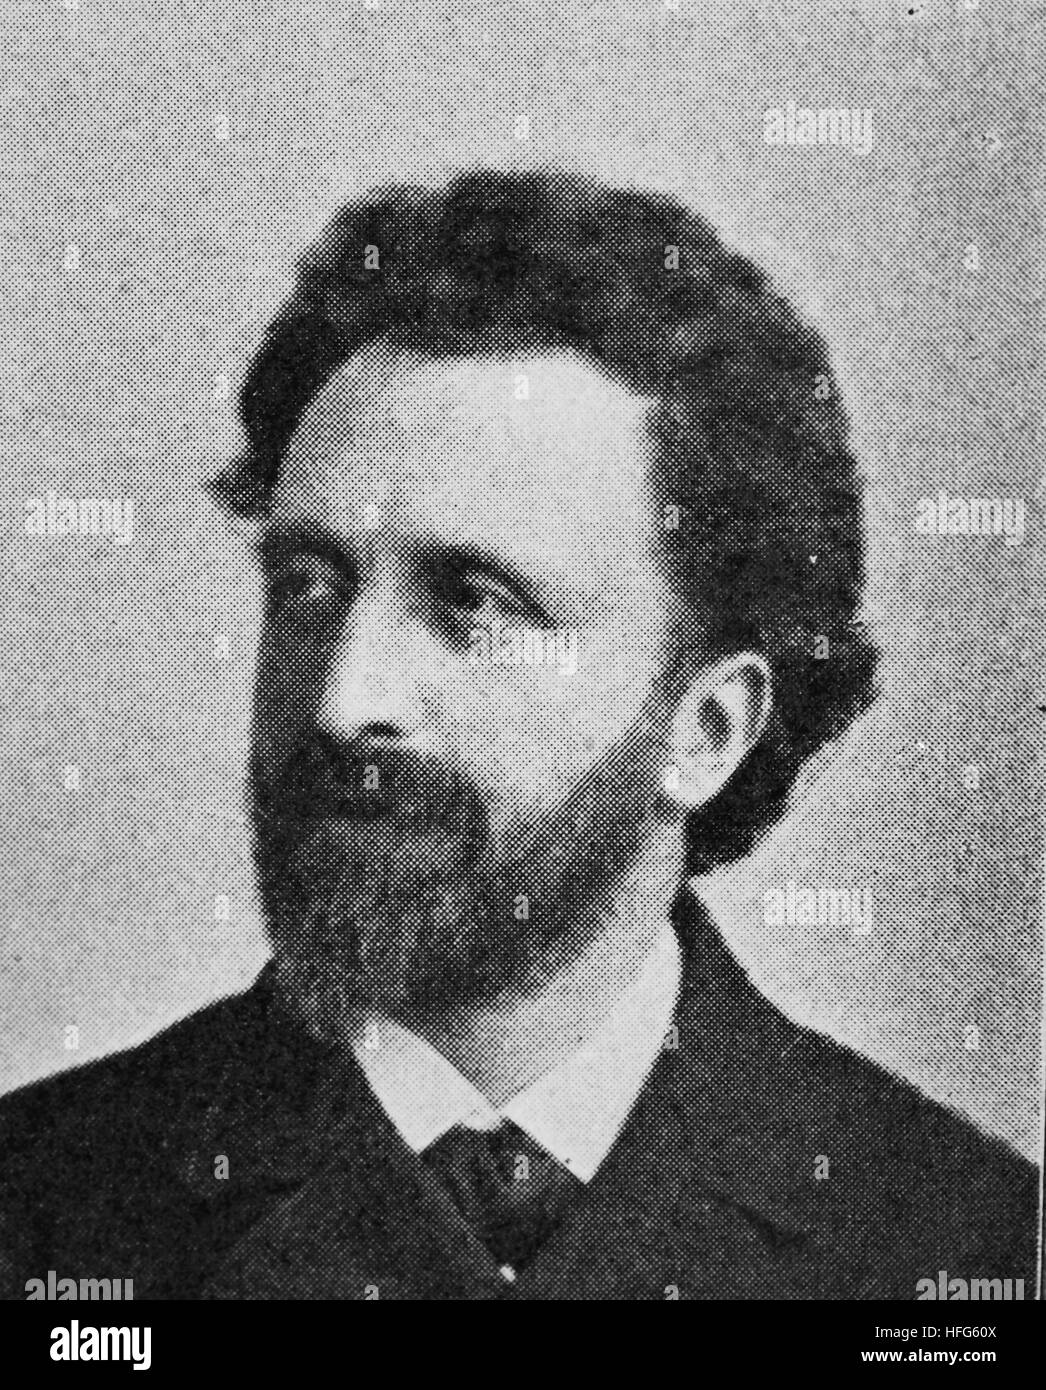 Friedrich Gernsheim, 1839 - 1916, was a German composer, conductor and pianist., reproduction photo from the year 1895, digital improved Stock Photo